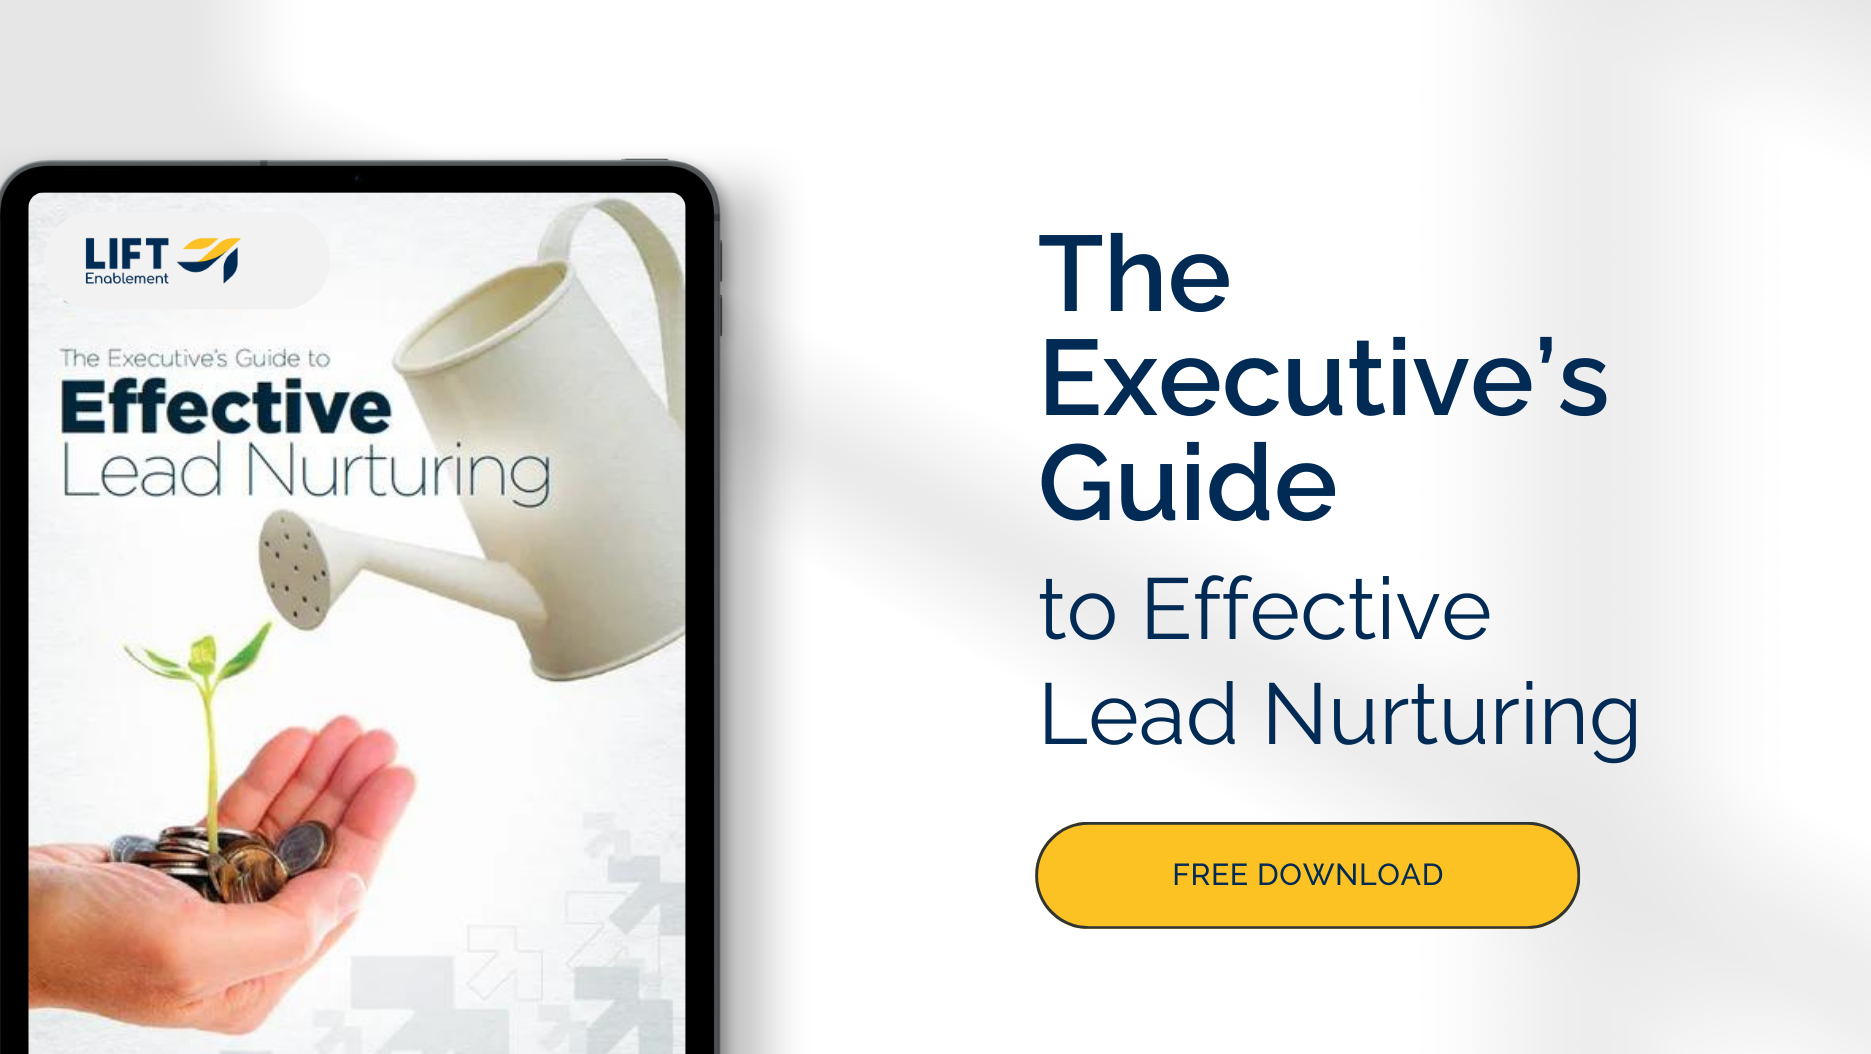 executives-guide-to-effective-lead-nurturing-cta